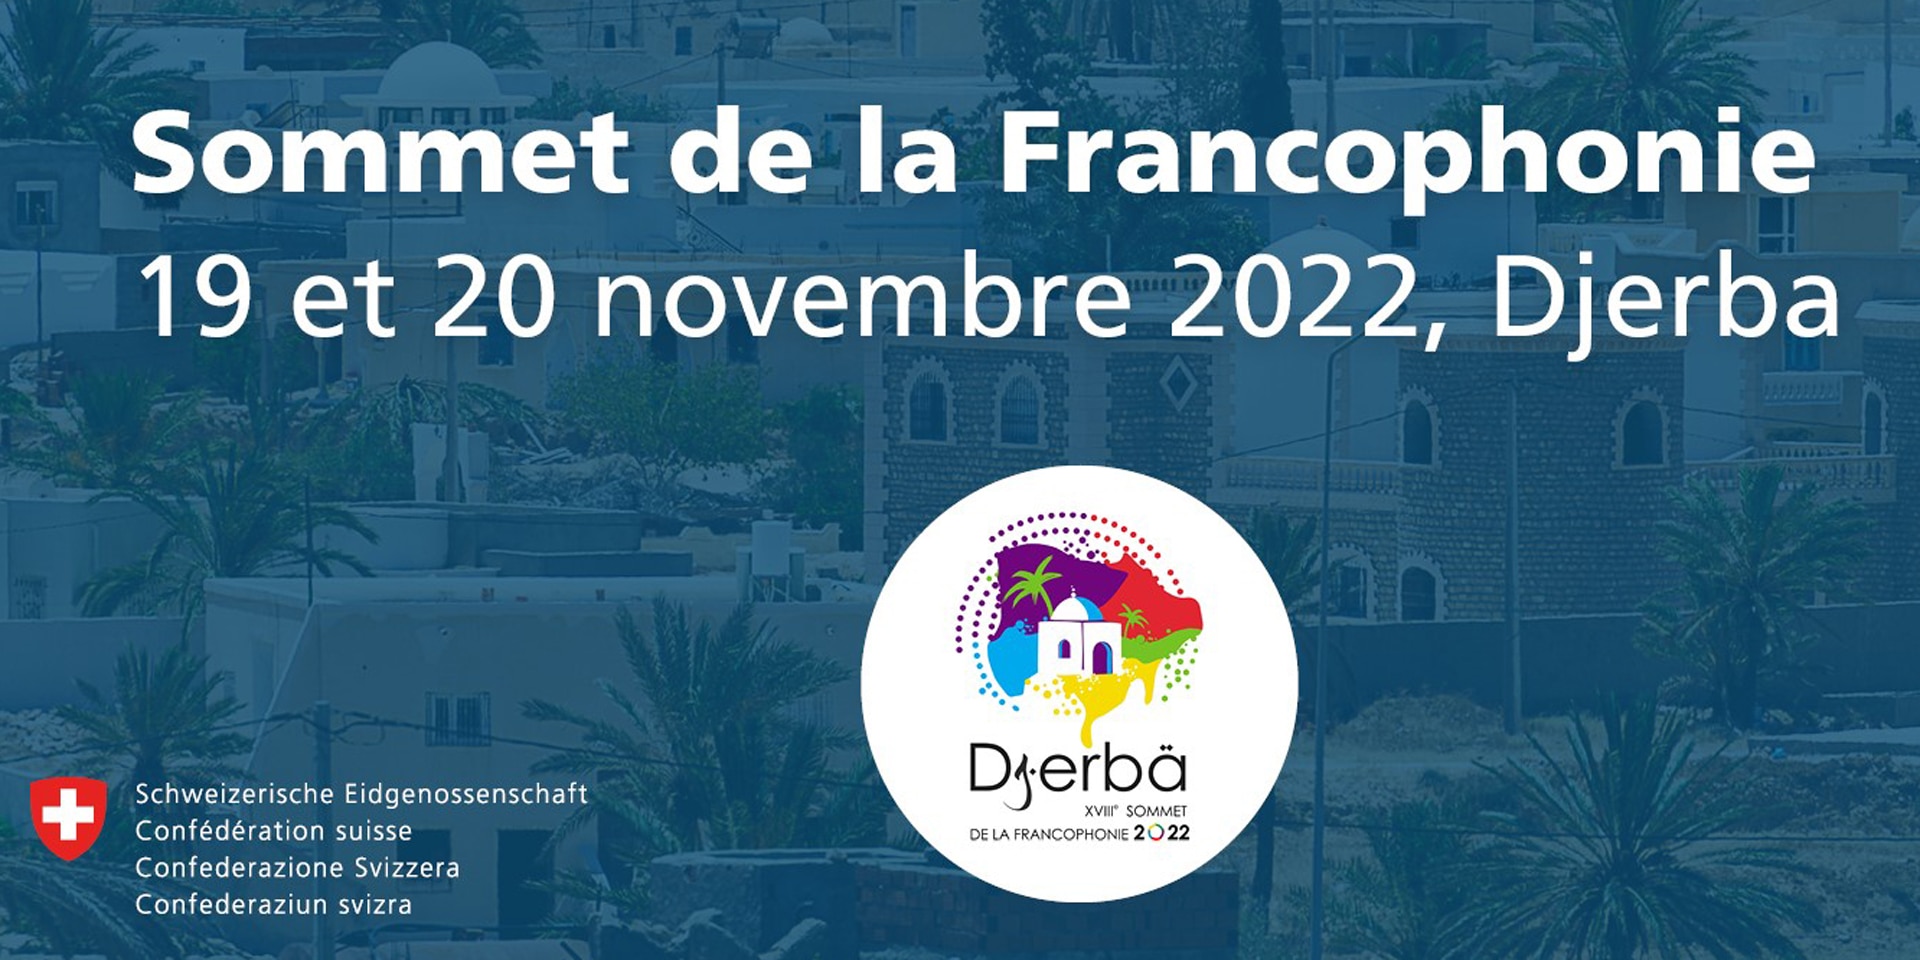 Poster announcing the Francophonie Summit, which is being held this year in Djerba.